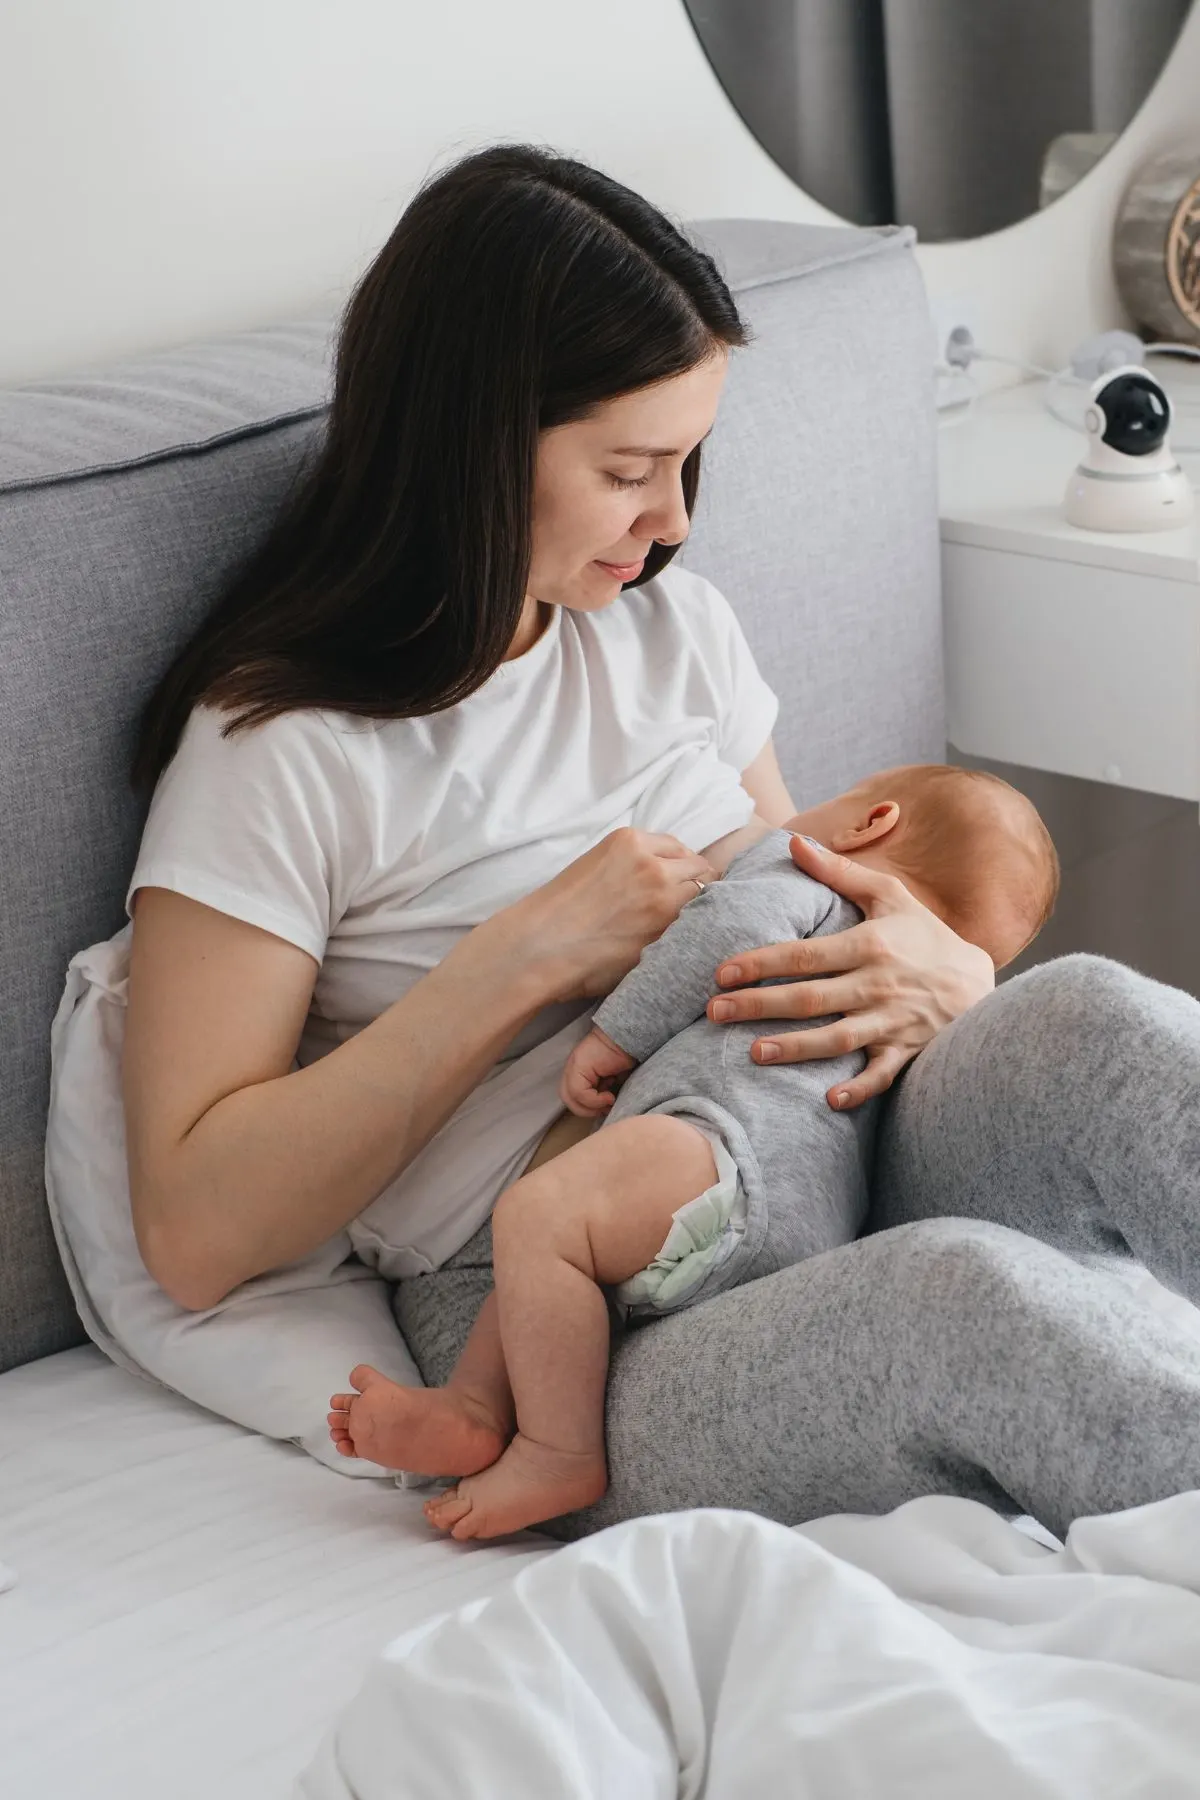 A sick woman breastfeeding her baby while sitting in bed.